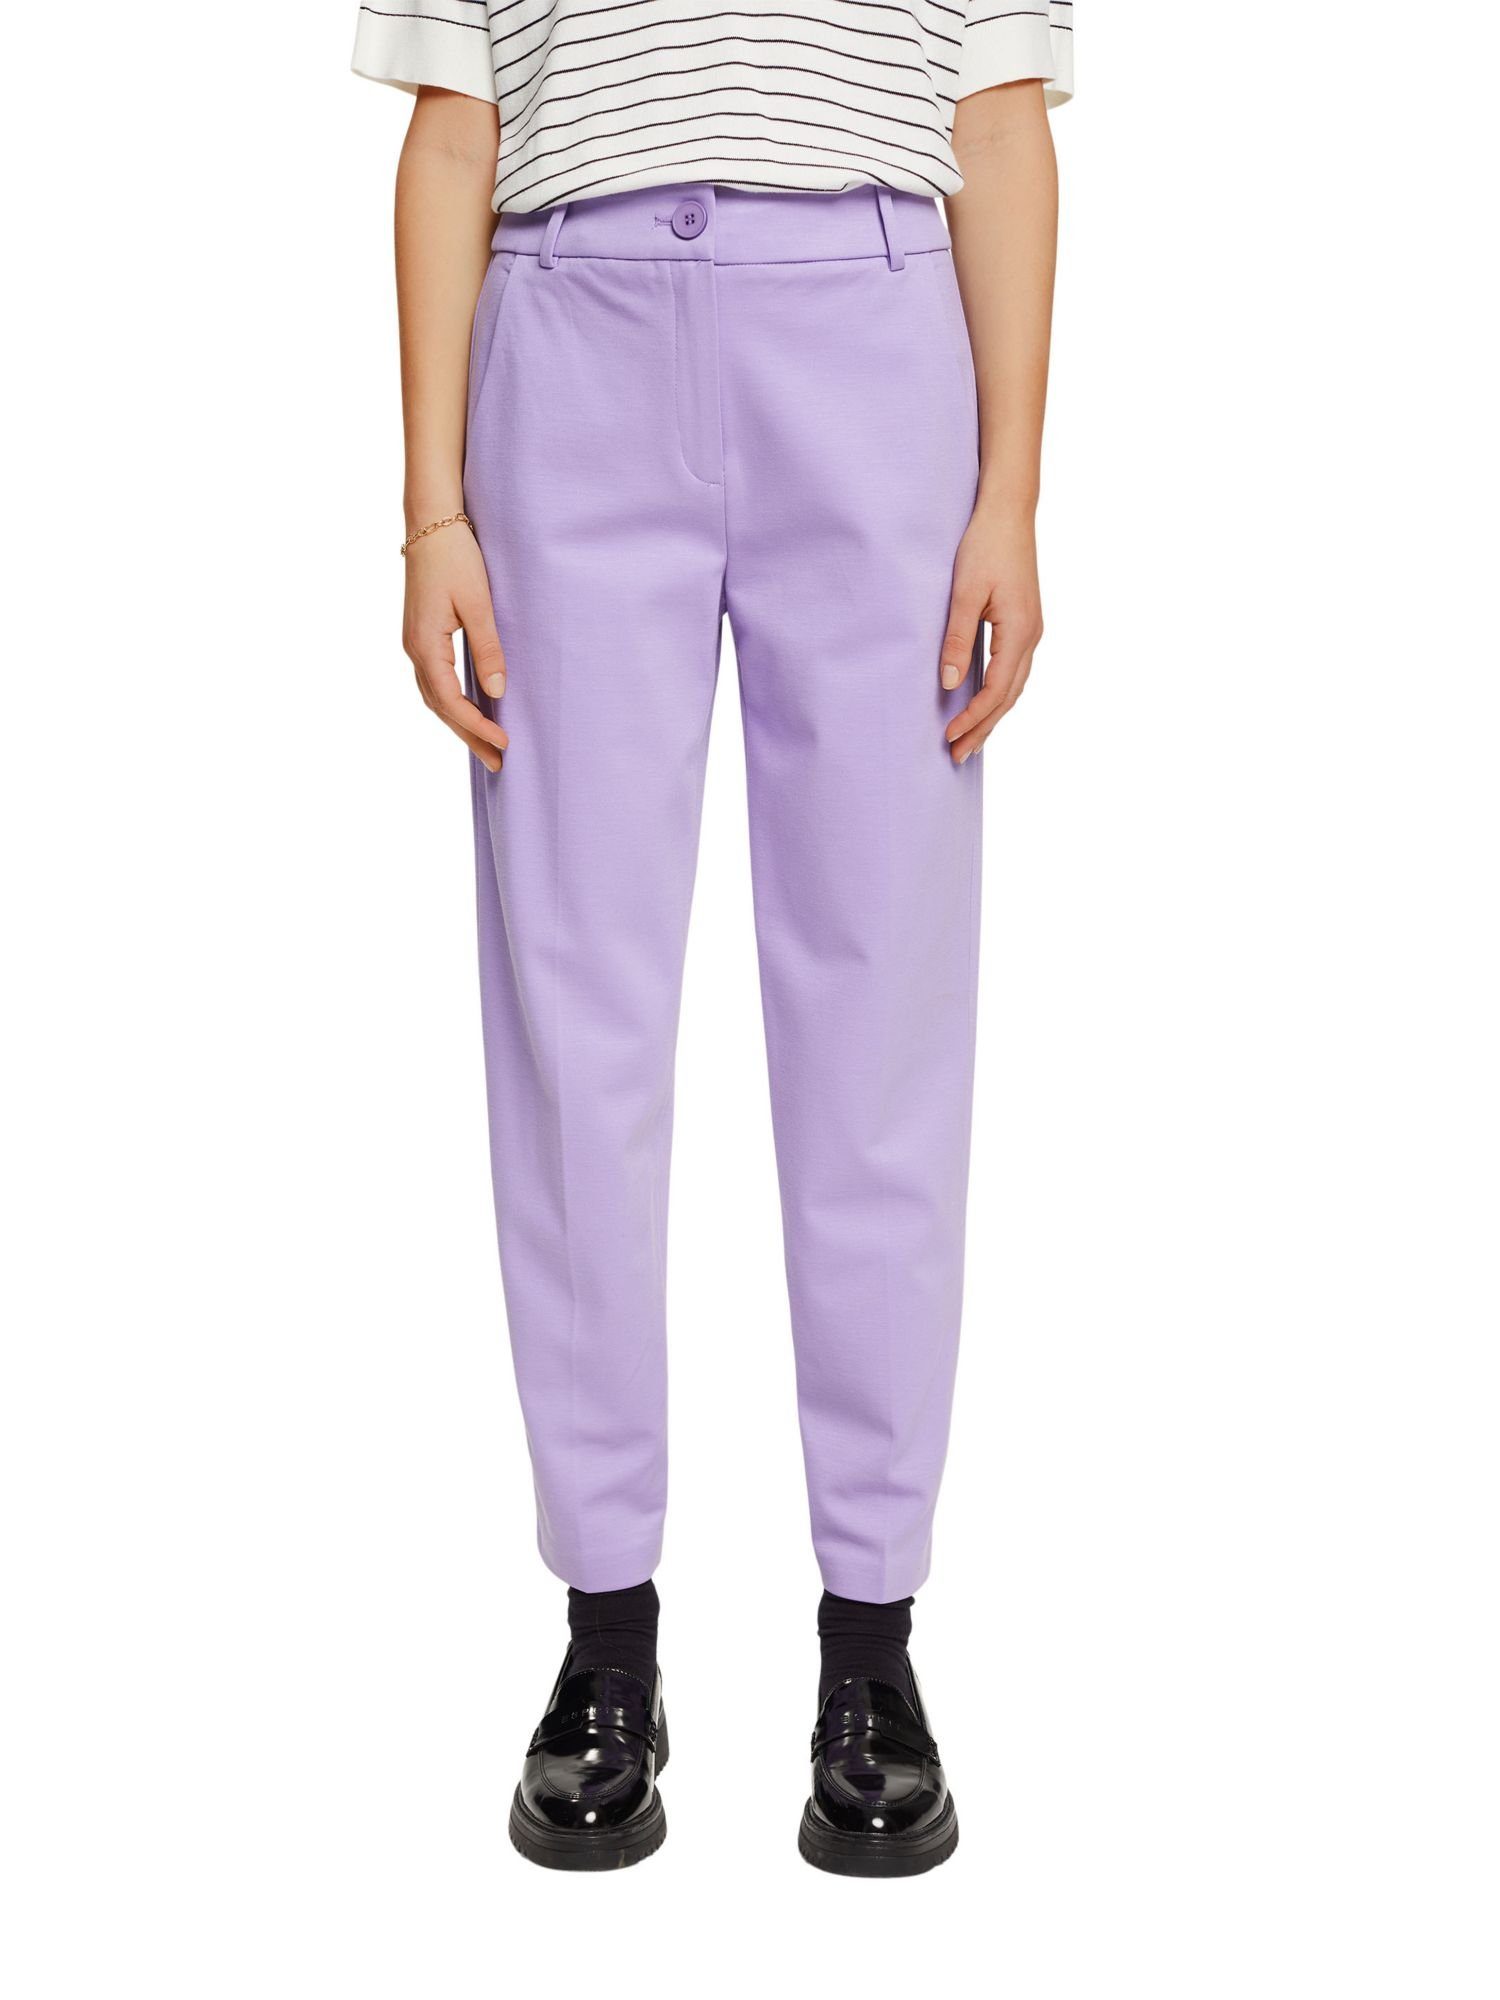 & Match Stretch-Hose Pants LAVENDER PUNTO Collection Mix Tapered SPORTY Esprit